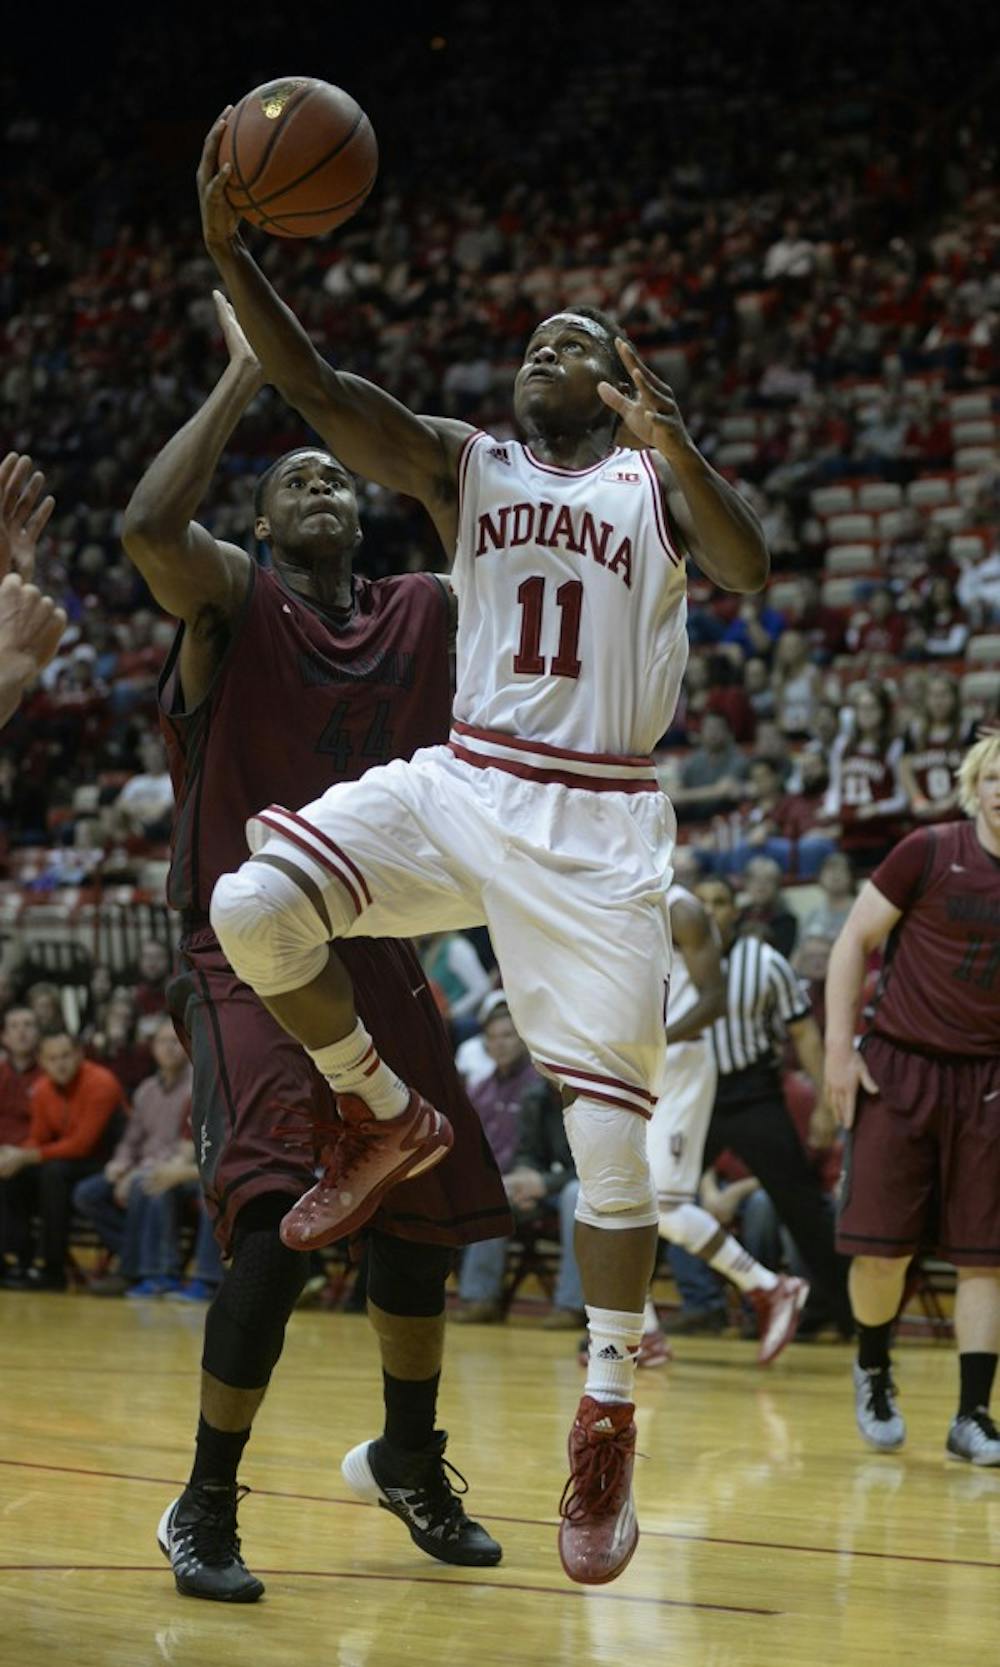 Junior guard Kevin Yogi Ferrell takes a shot during the exhibition game against Indianapolis on Monday at Assembly Hall.